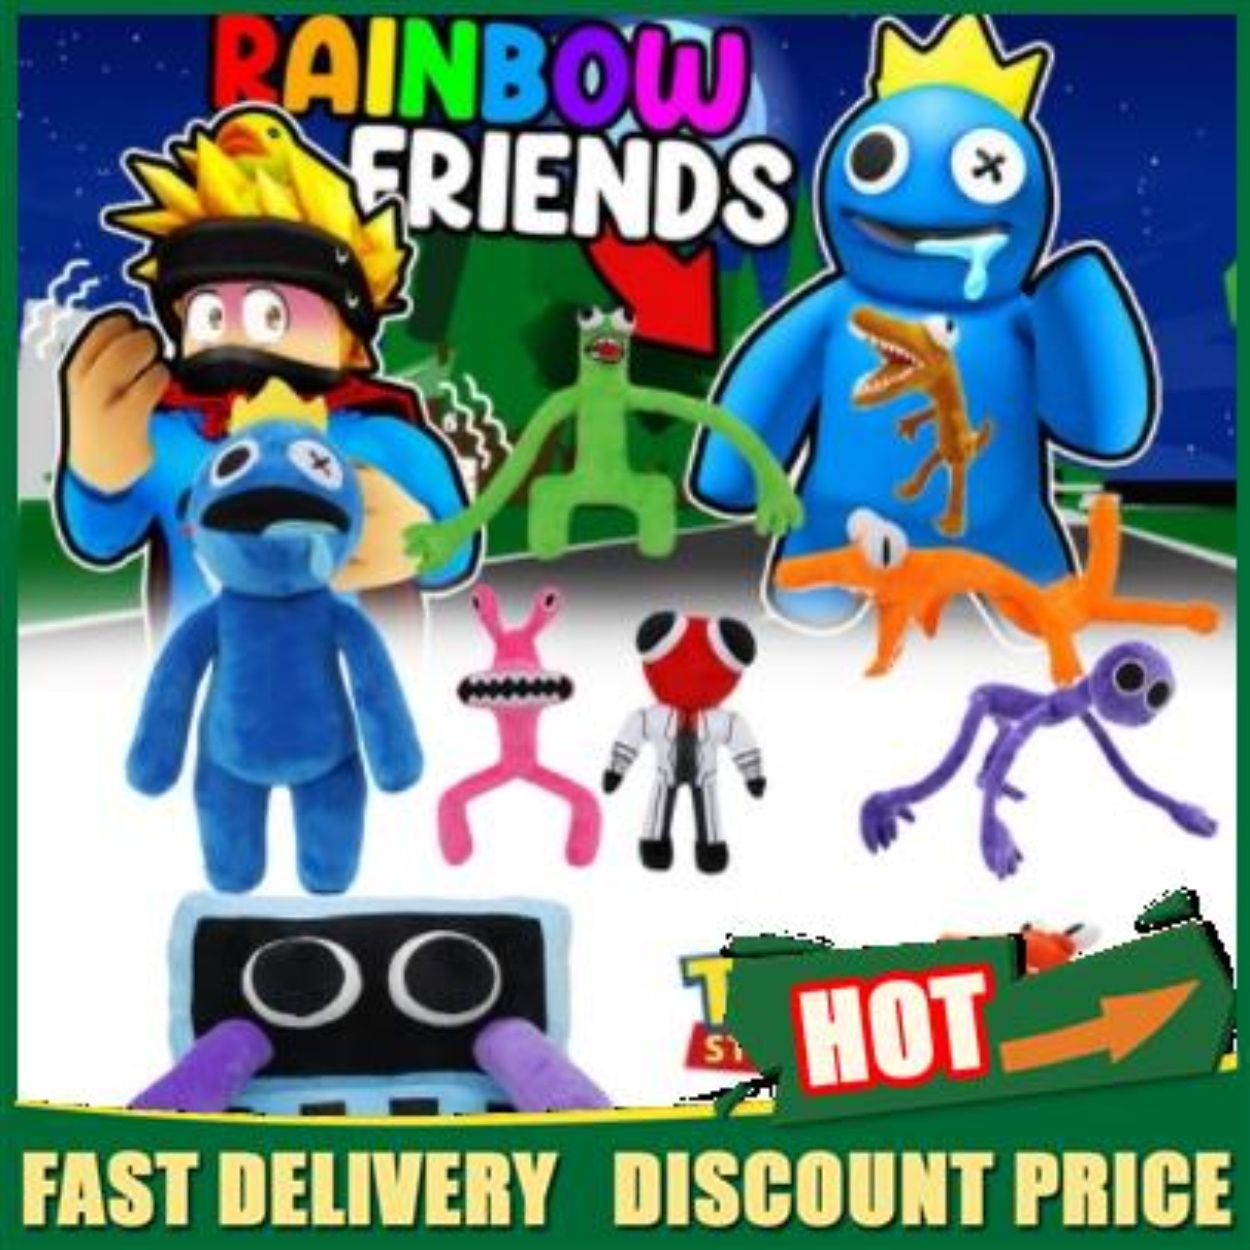 Roblox Rainbow friends Stop Motion animation with clay(red,blue